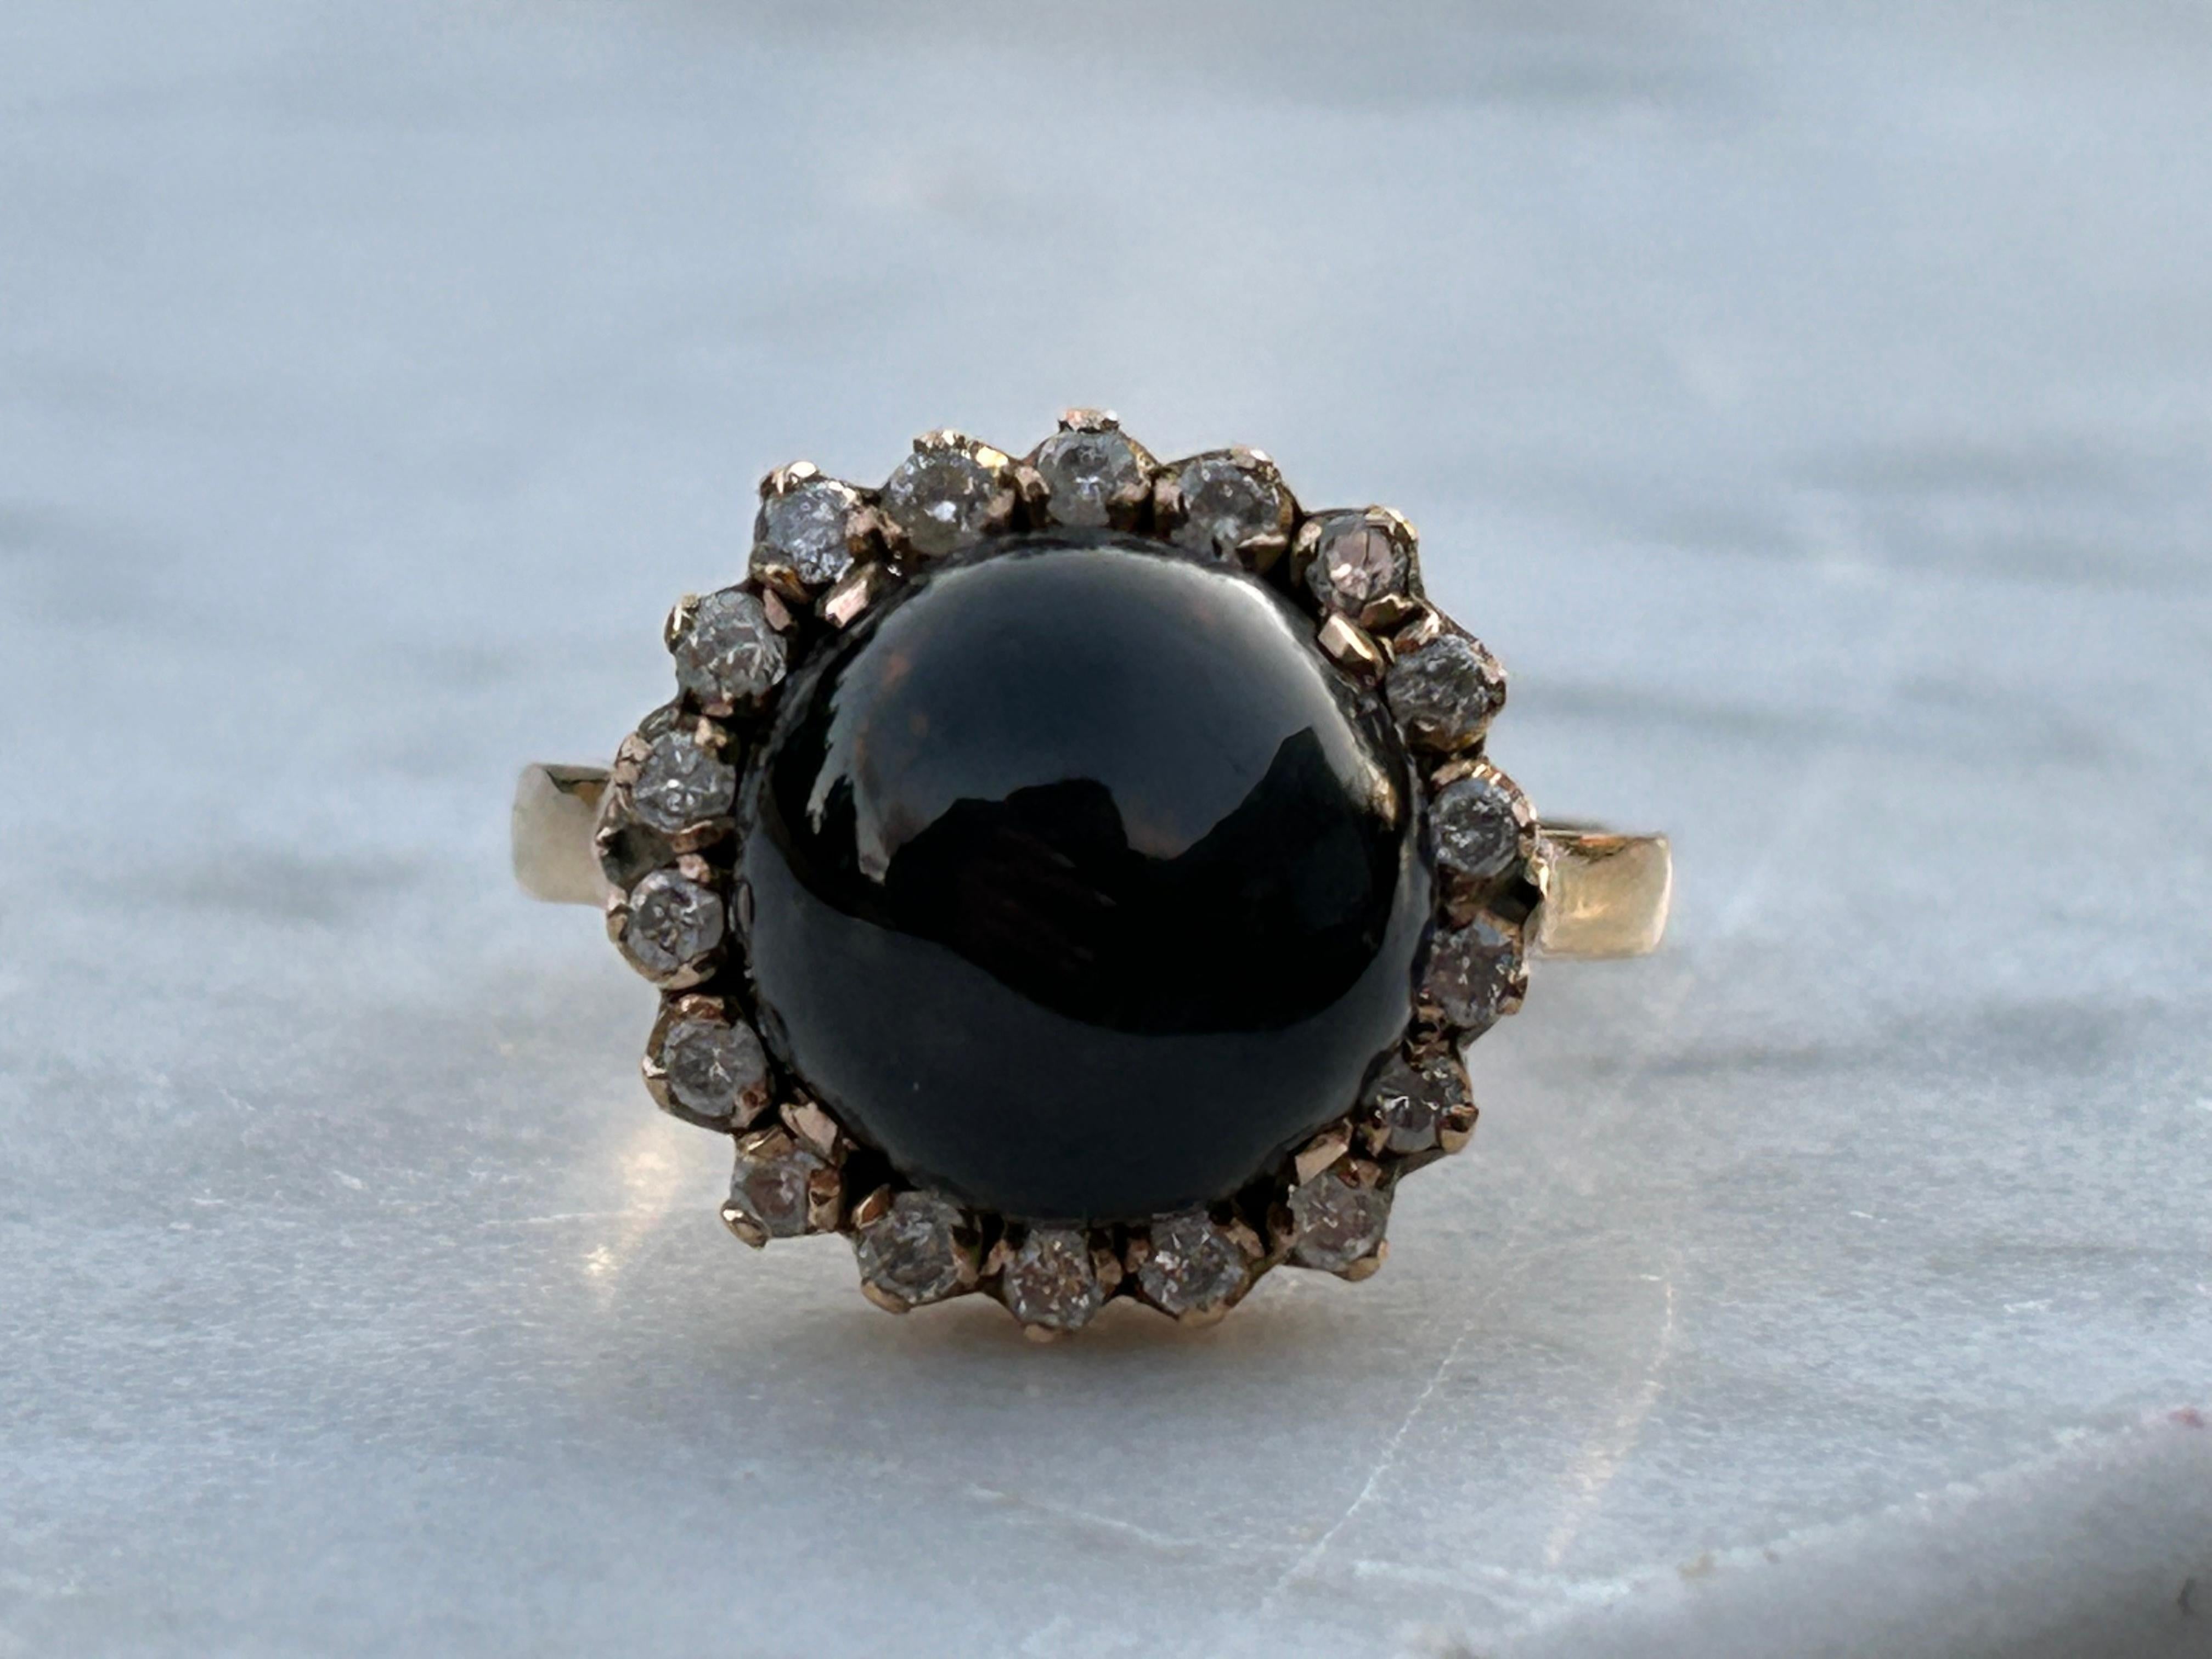 A vintage 18k gold black cabochon 4 point Star Diopside and Diamond Ring. This ring has a lovely shimmering 